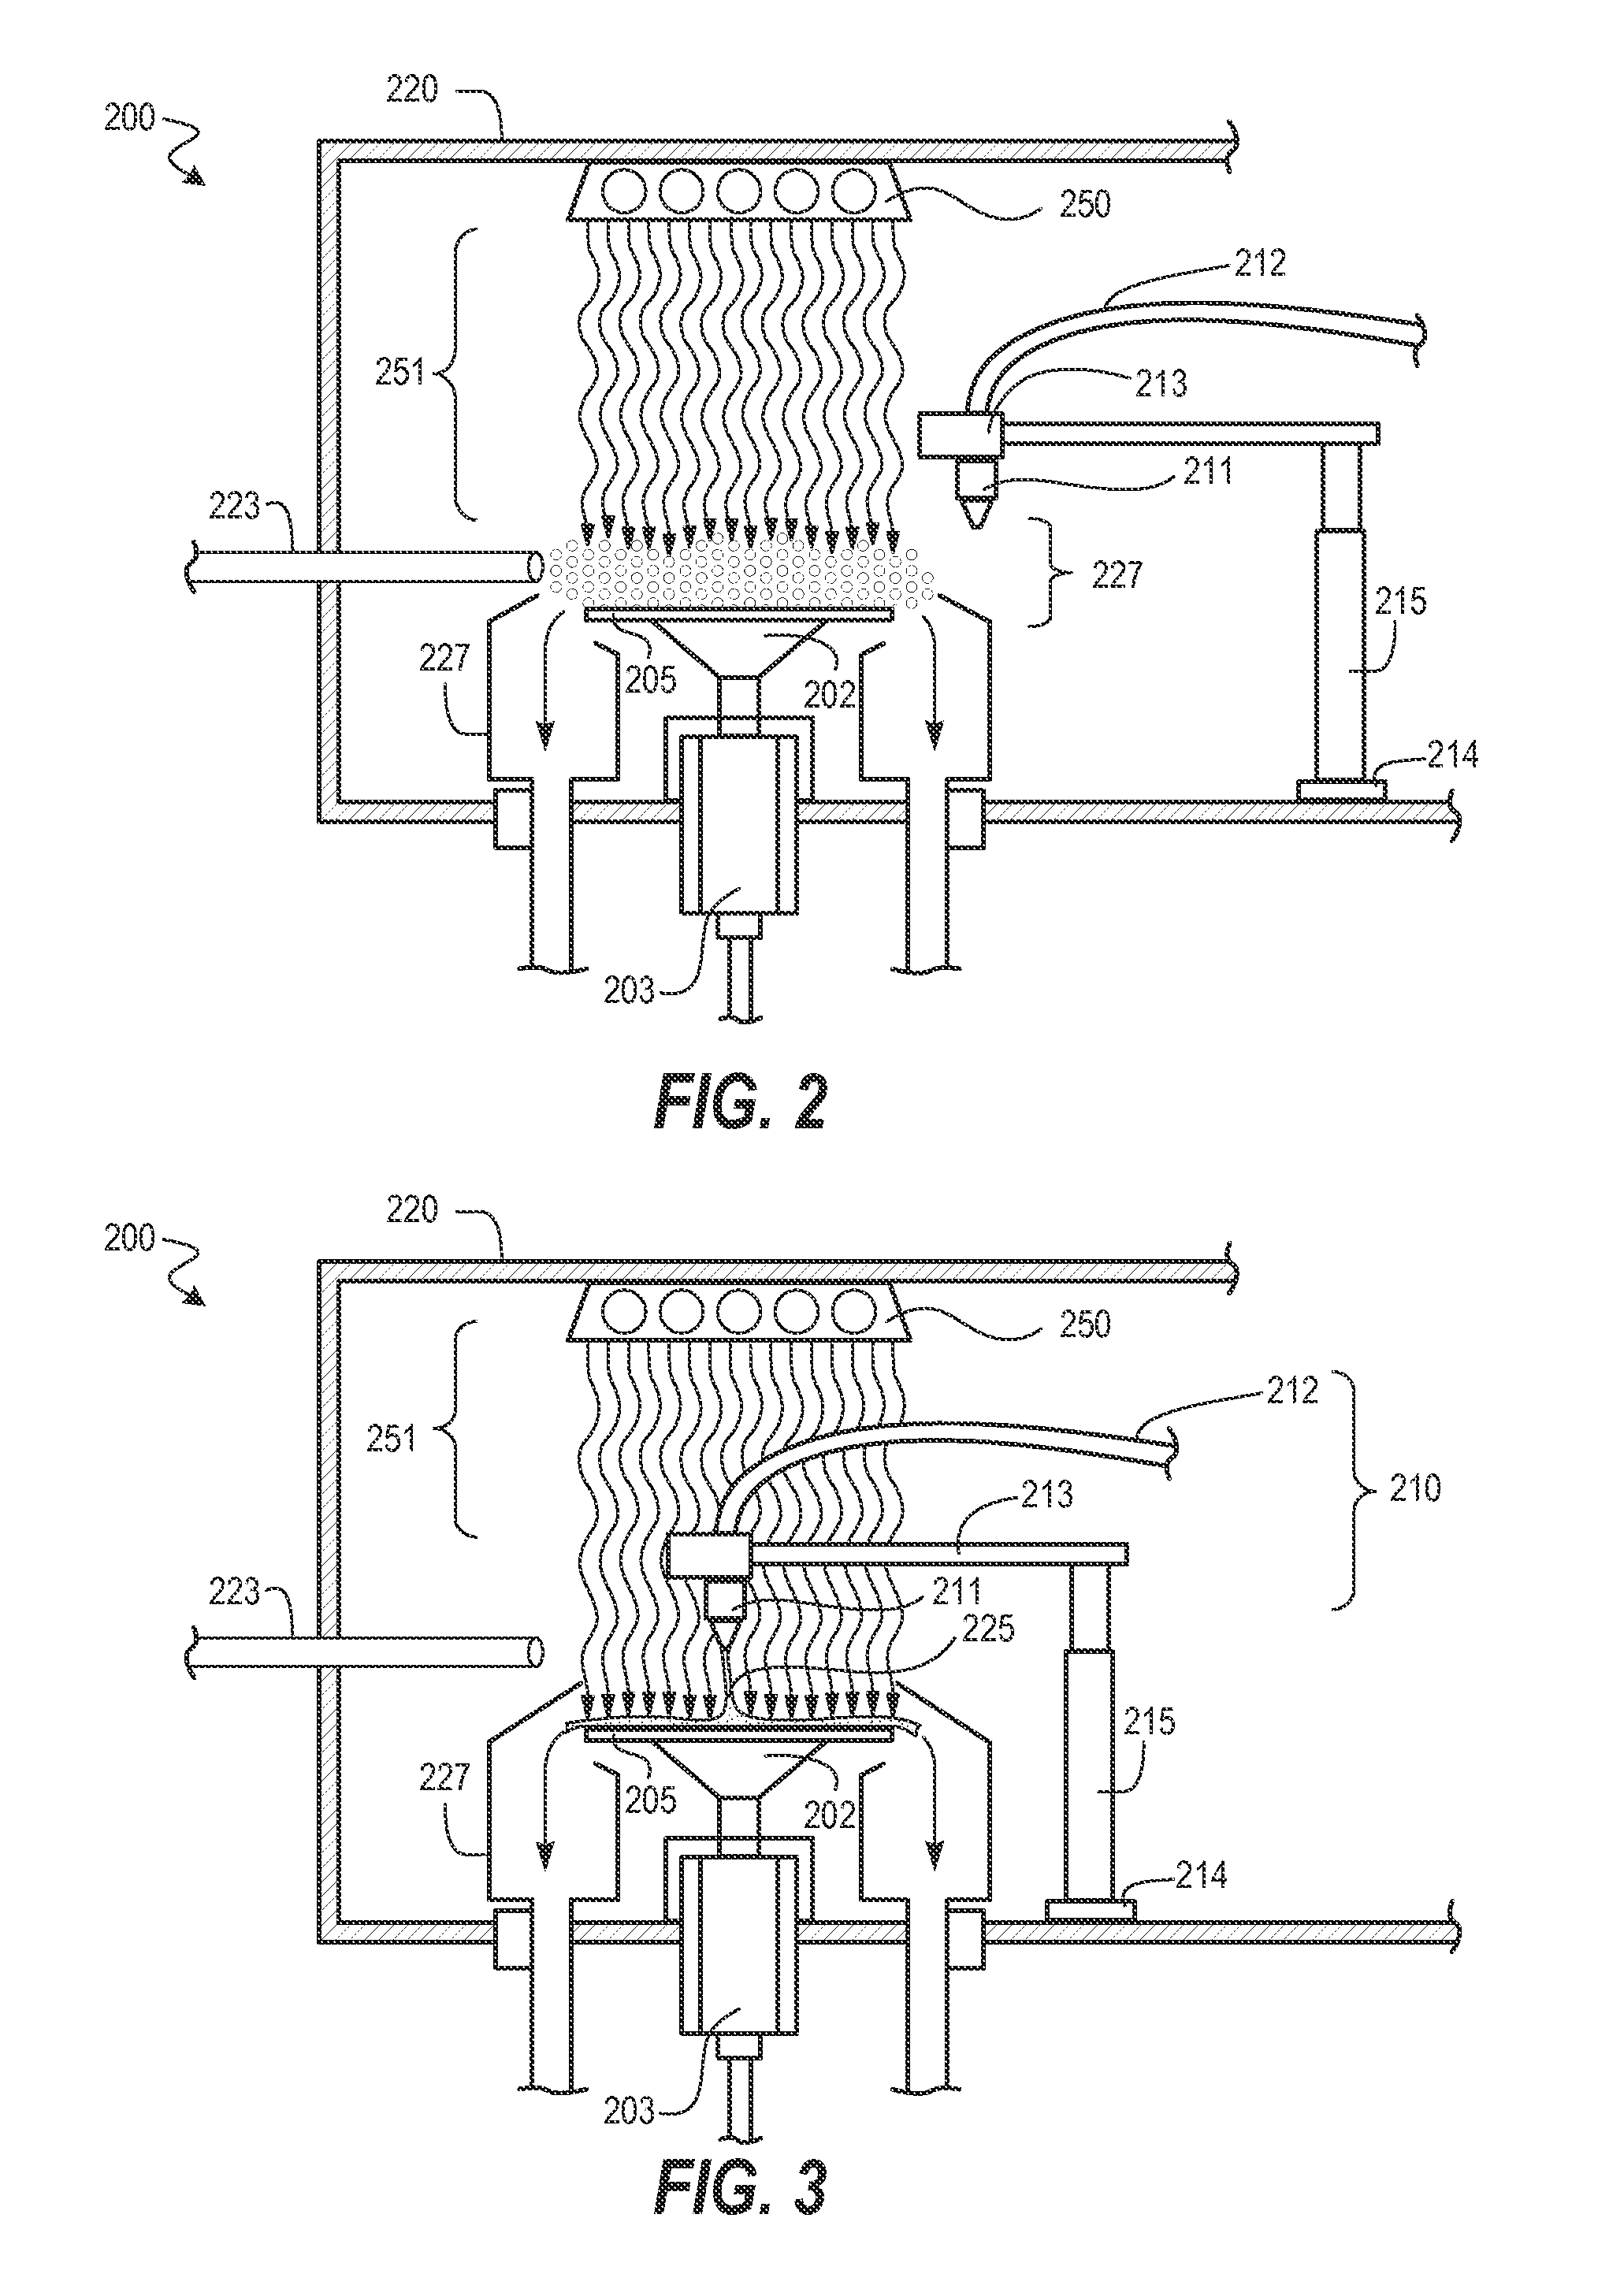 Method and Hardware for Enhanced Removal of Post Etch Polymer and Hardmask Removal